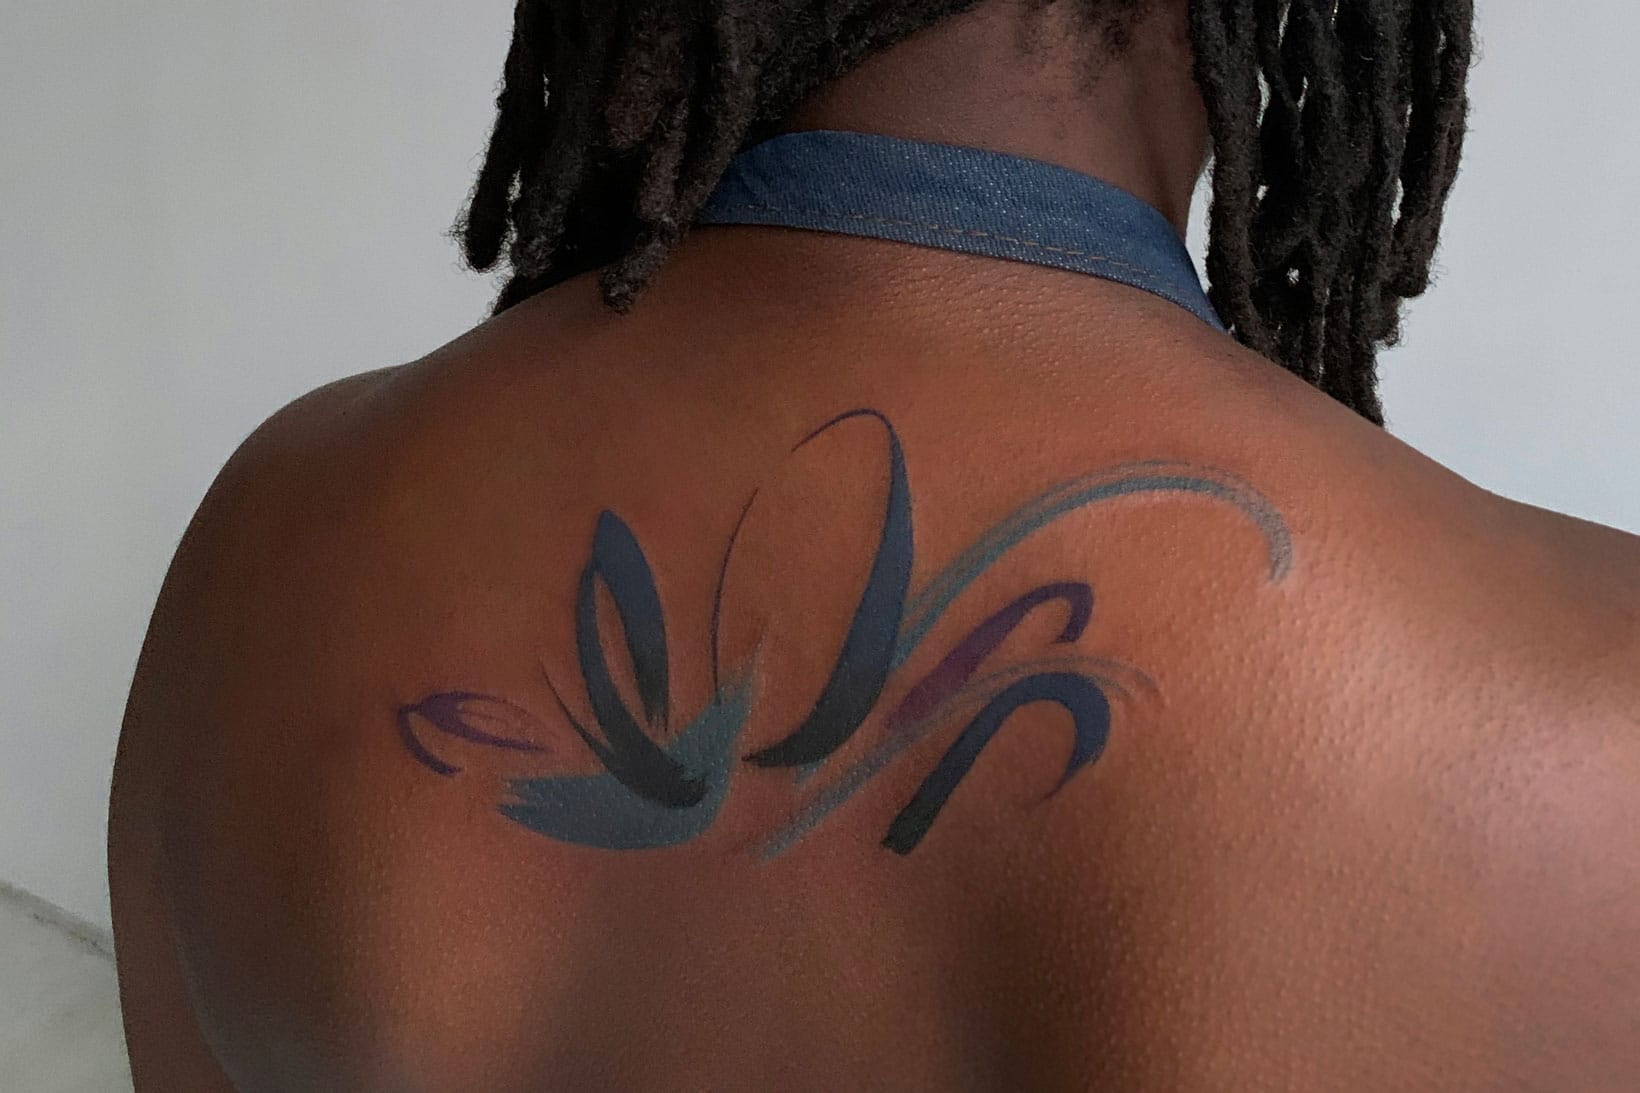 Cool NYC Tattoos - Body Art Meaning